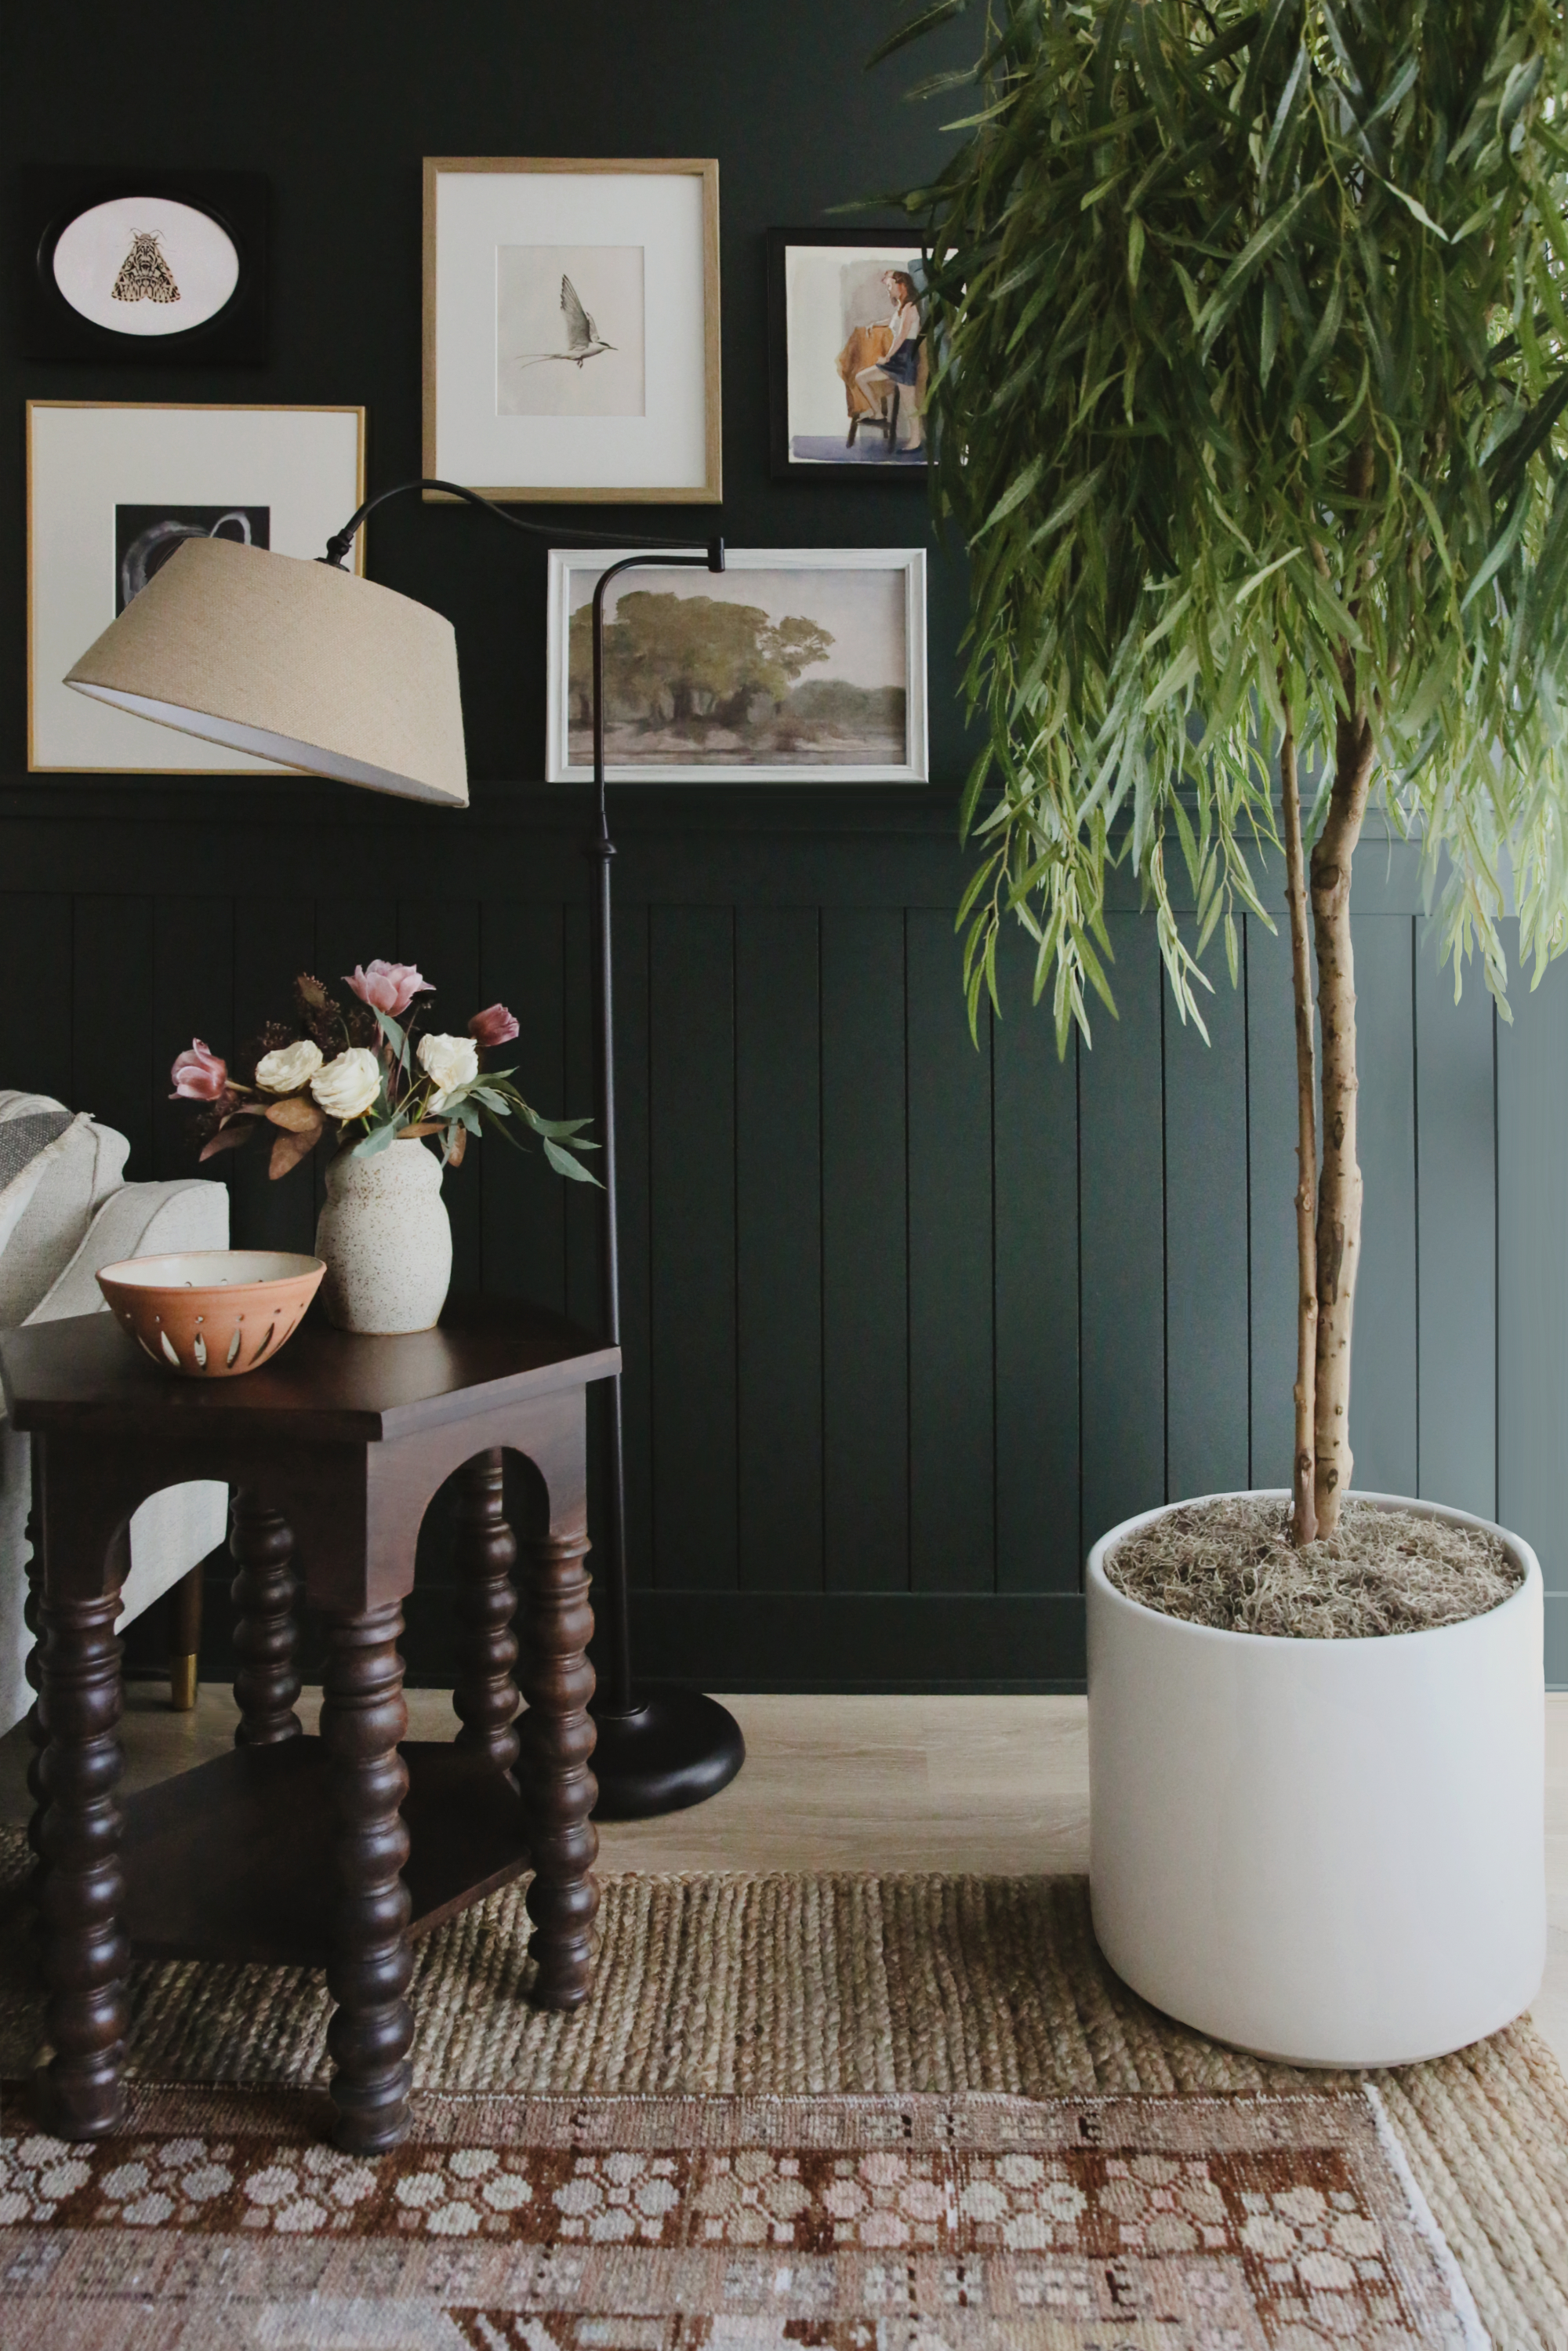 How to Make a Faux Tree Look More Real - Jenny Komenda